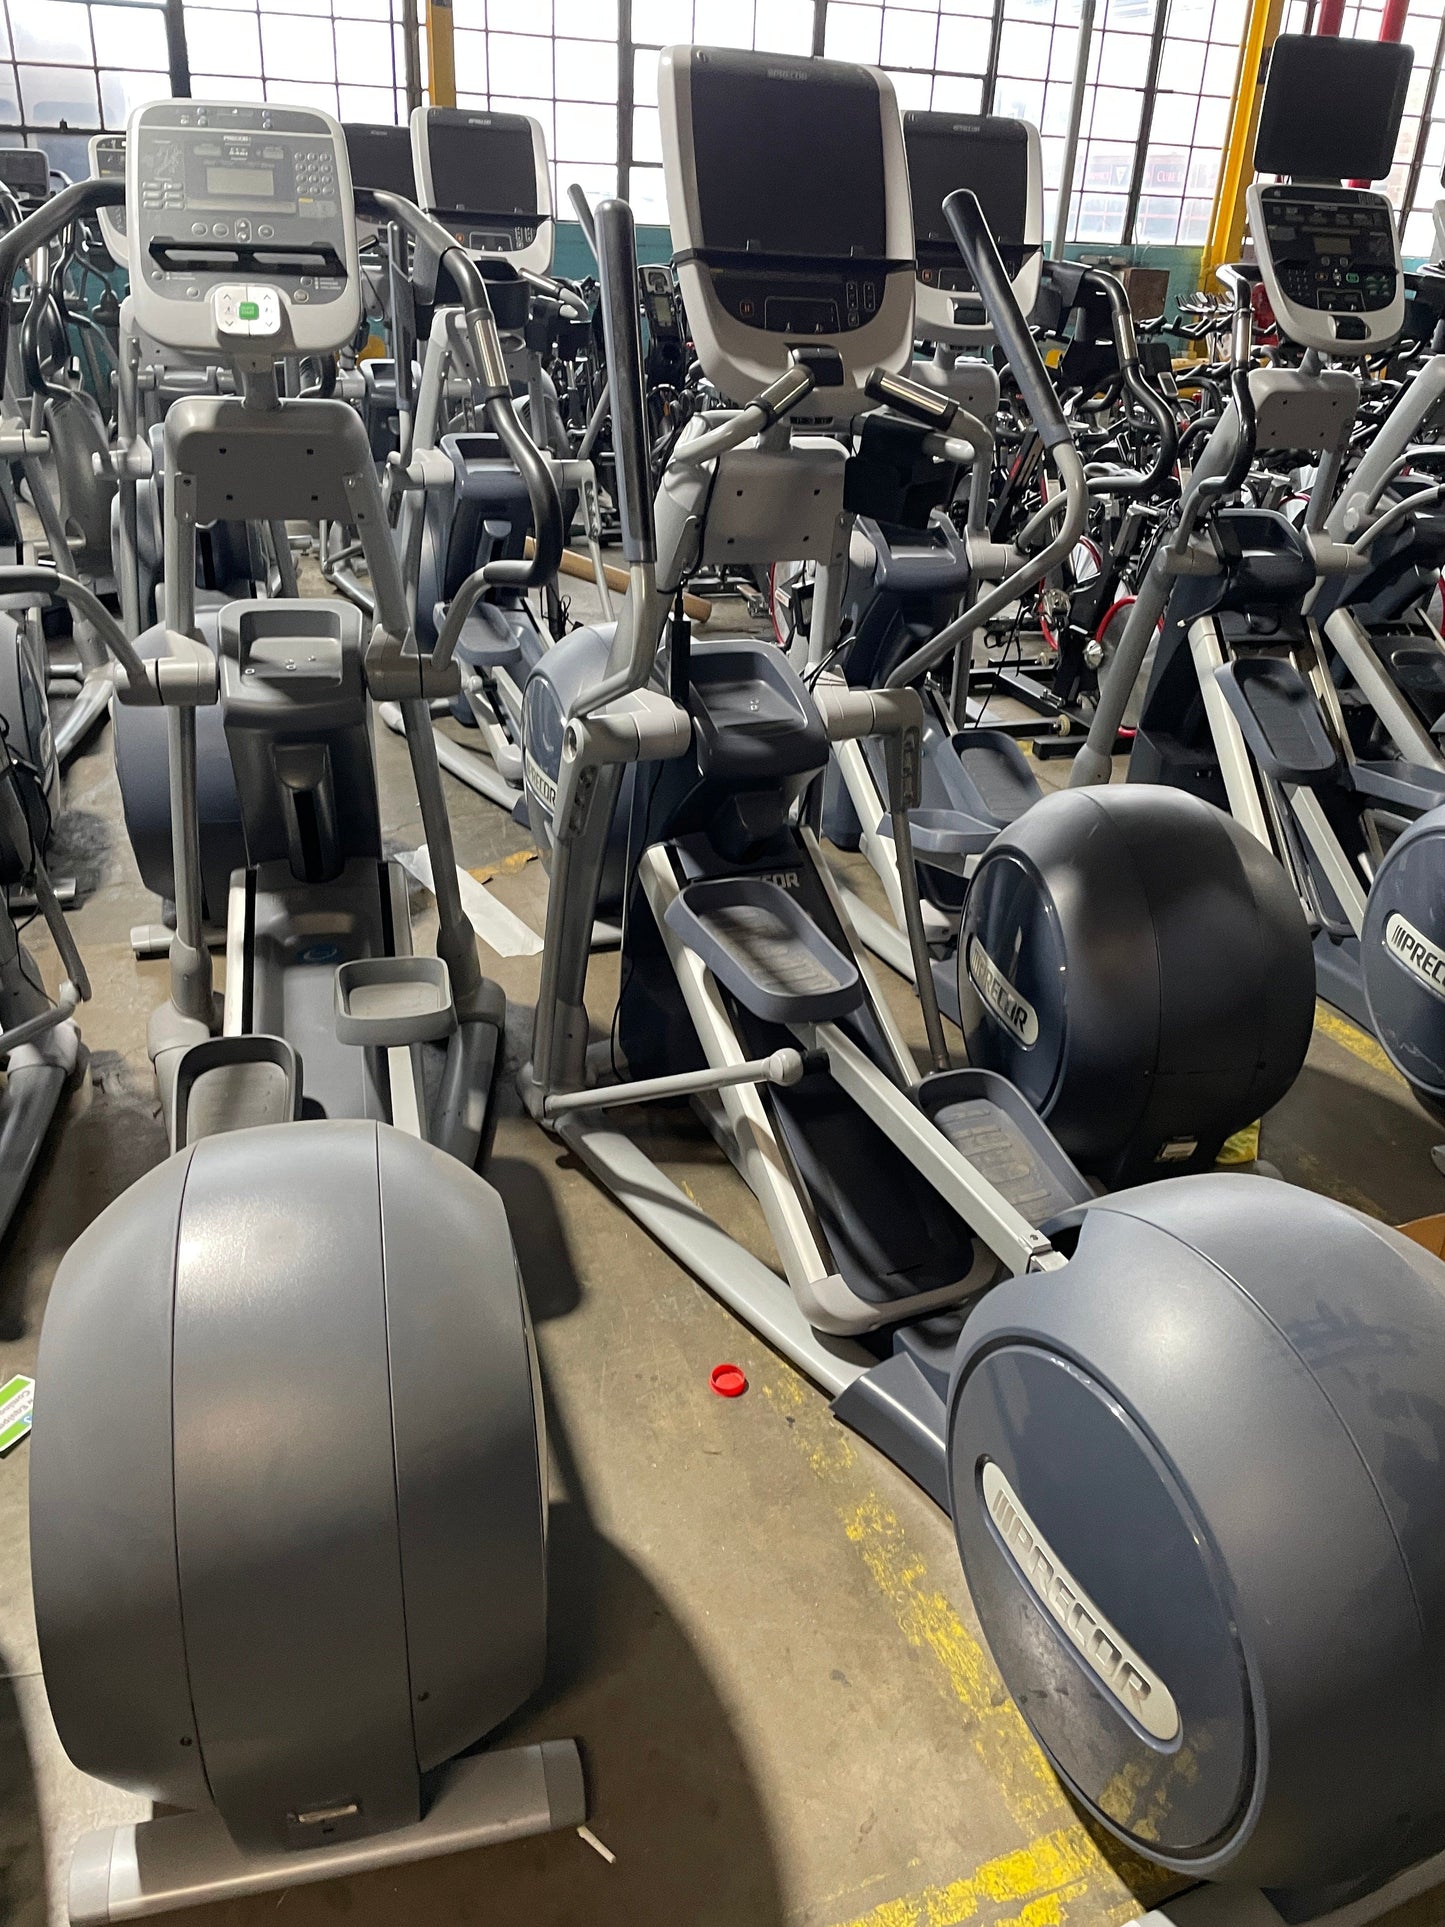 RTC Fitness Equipment 992 - Sporting Goods > Exercise & Fitness > Cardio > Cardio Machines > Elliptical Trainers Precor EFX 885 Total Body Elliptical with P80 Console